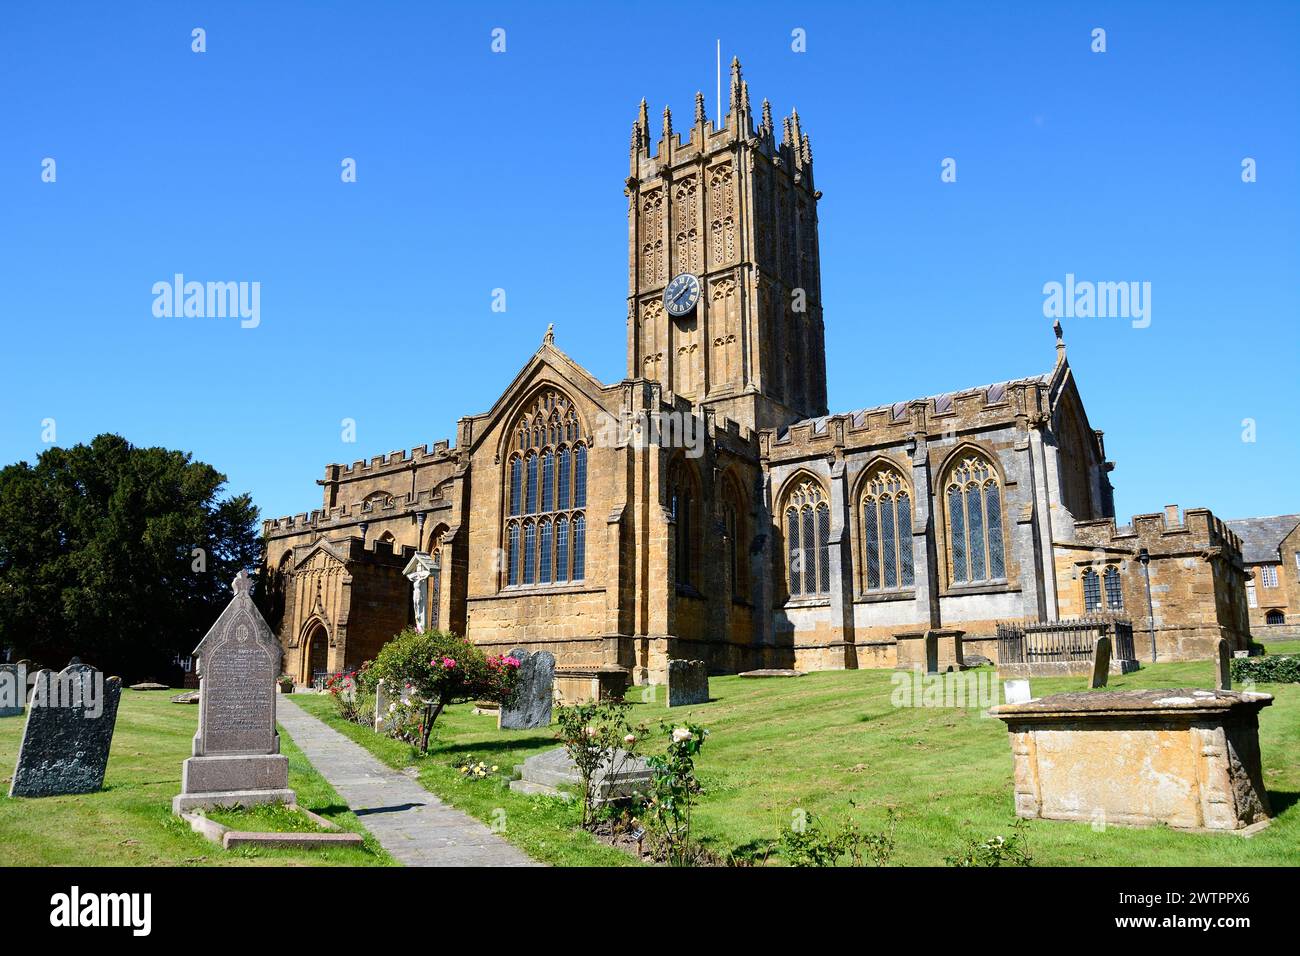 Front view of St Marys Minster Church in the town centre with the graveyard in the foreground, Ilminster, Somerseset, UK, Europe. Stock Photo